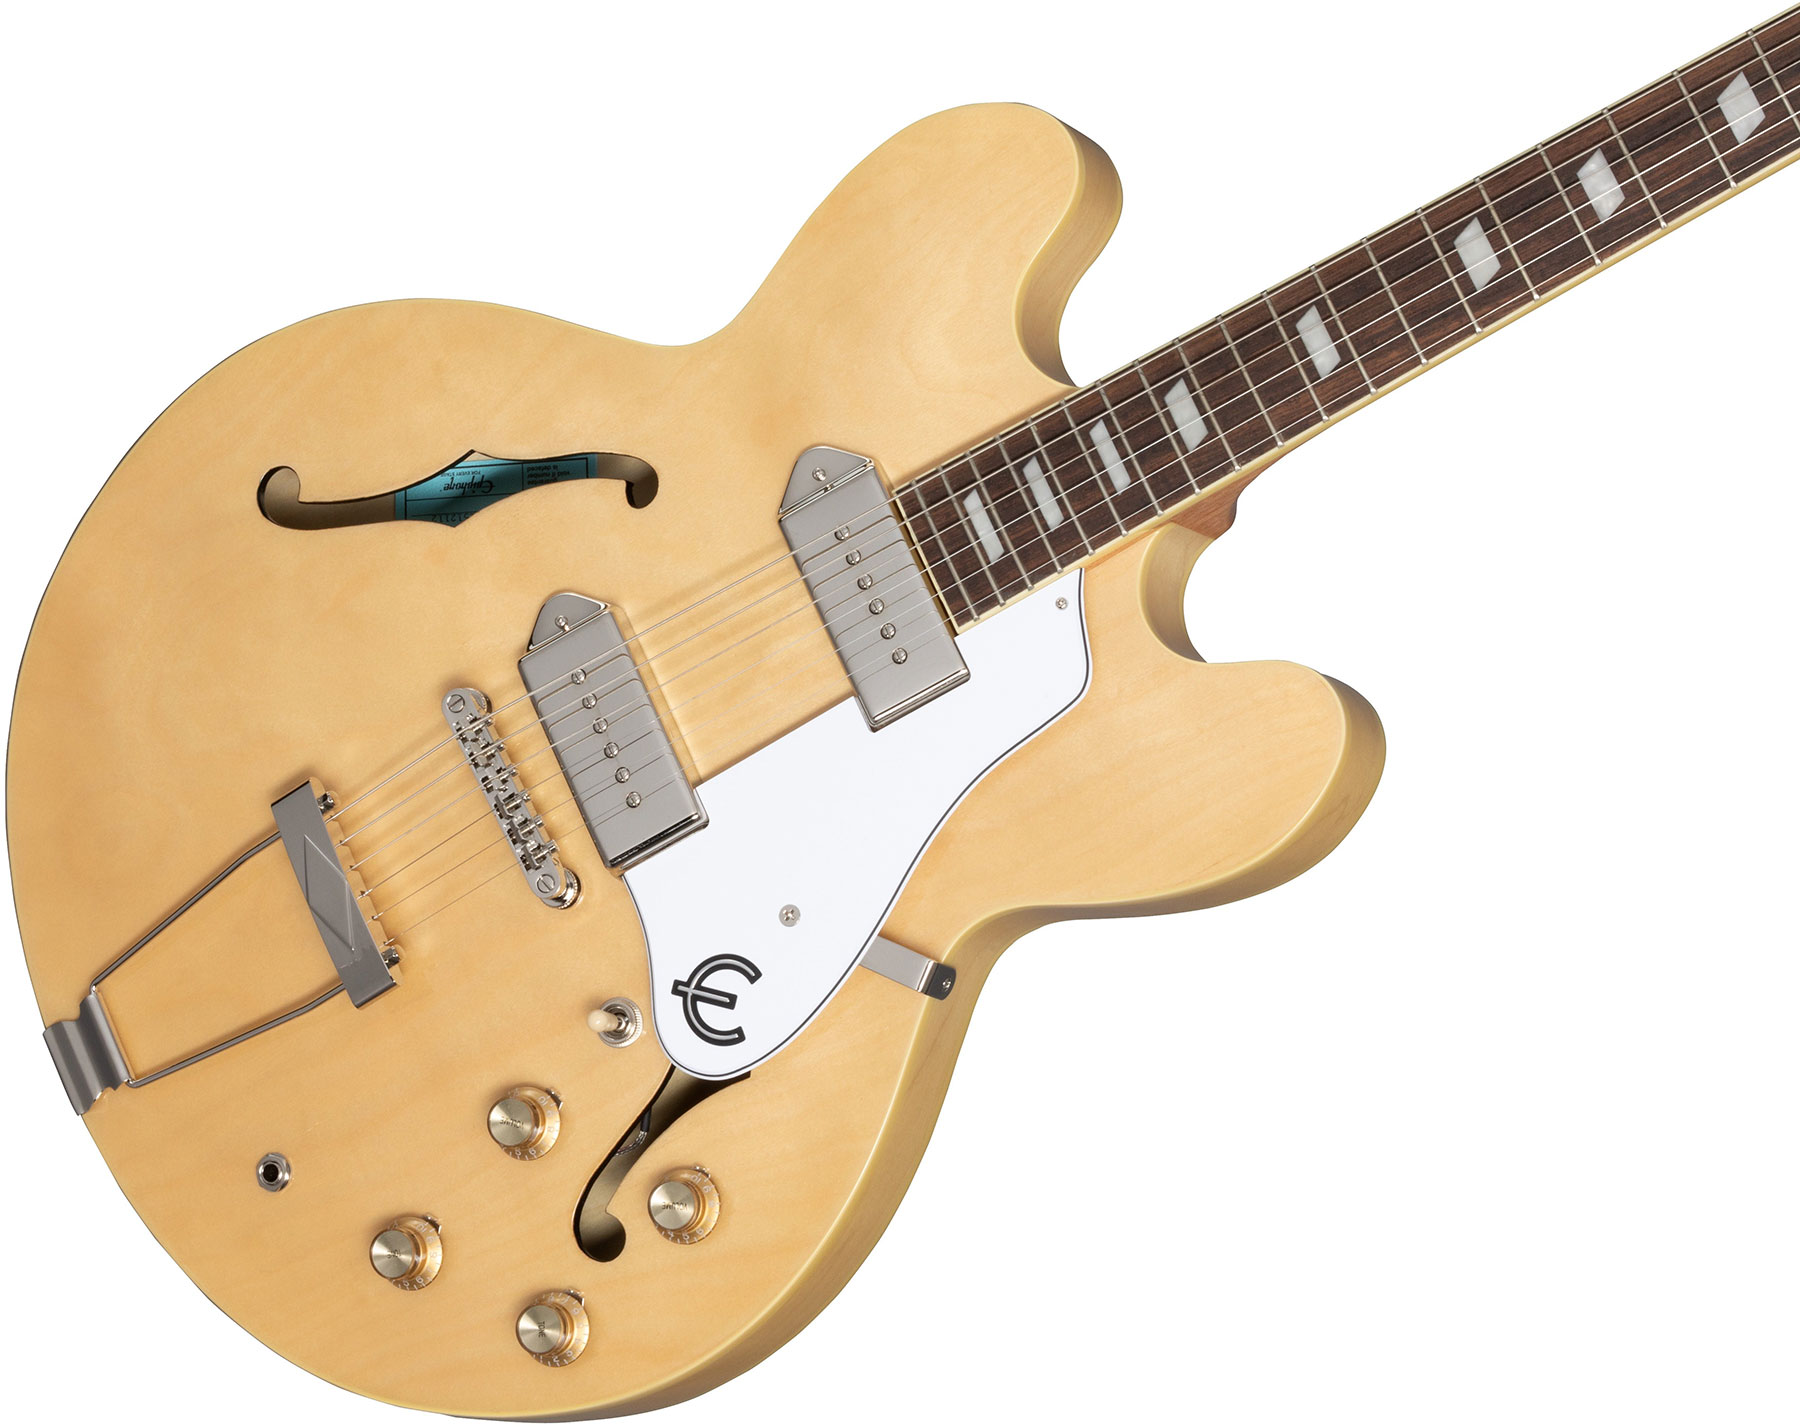 Epiphone Casino Archtop 2023 2s P90 Ht Lau - Natural - Semi-hollow electric guitar - Variation 3